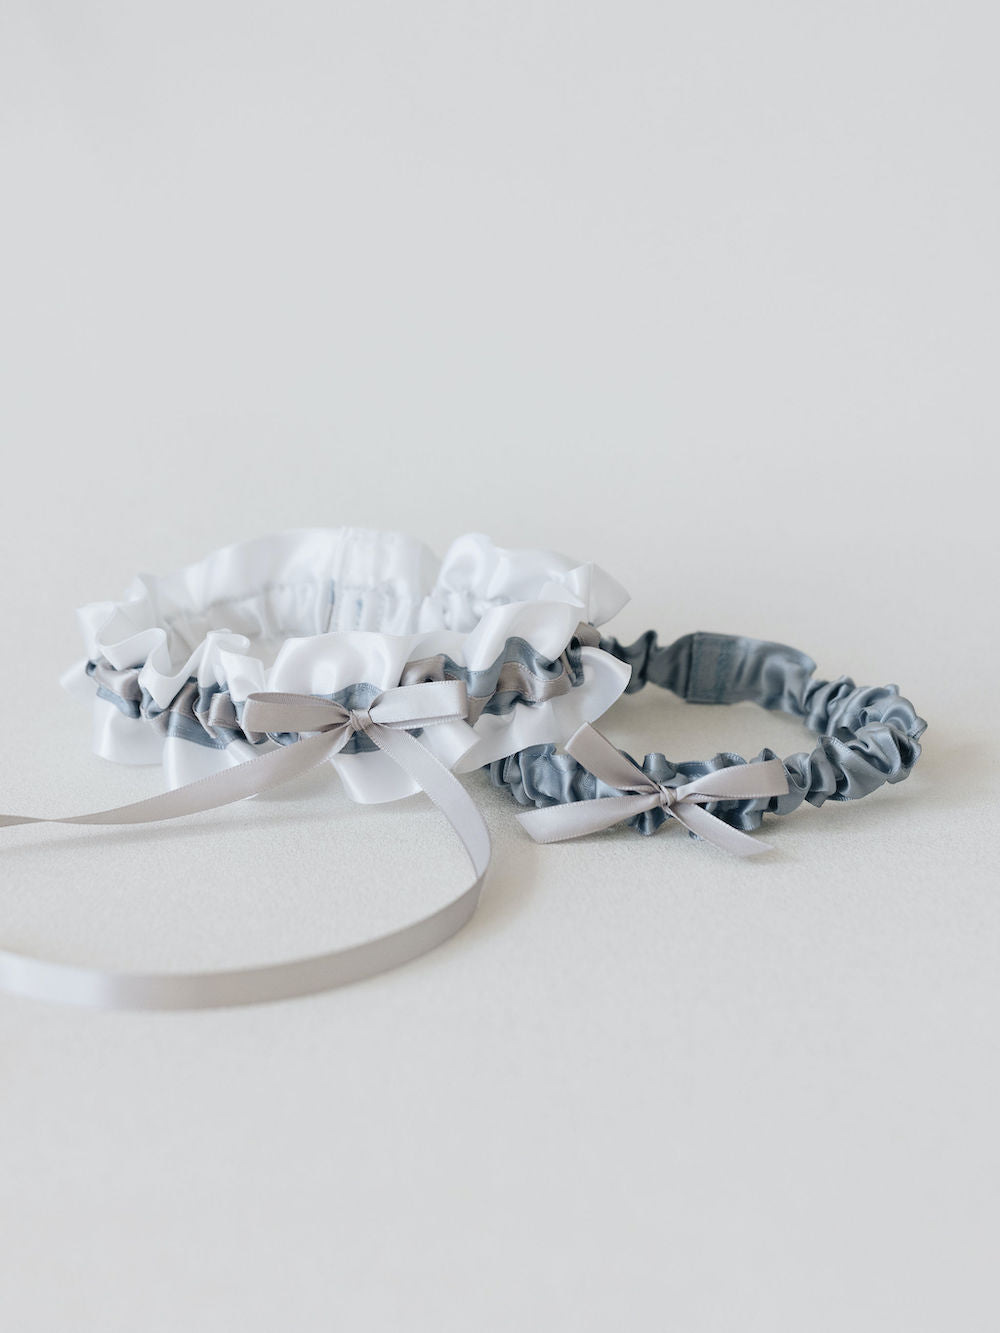 personalized wedding garter set with white, gray & dusty blue handmade by heirloom bridal accessory designer, The Garter Girl